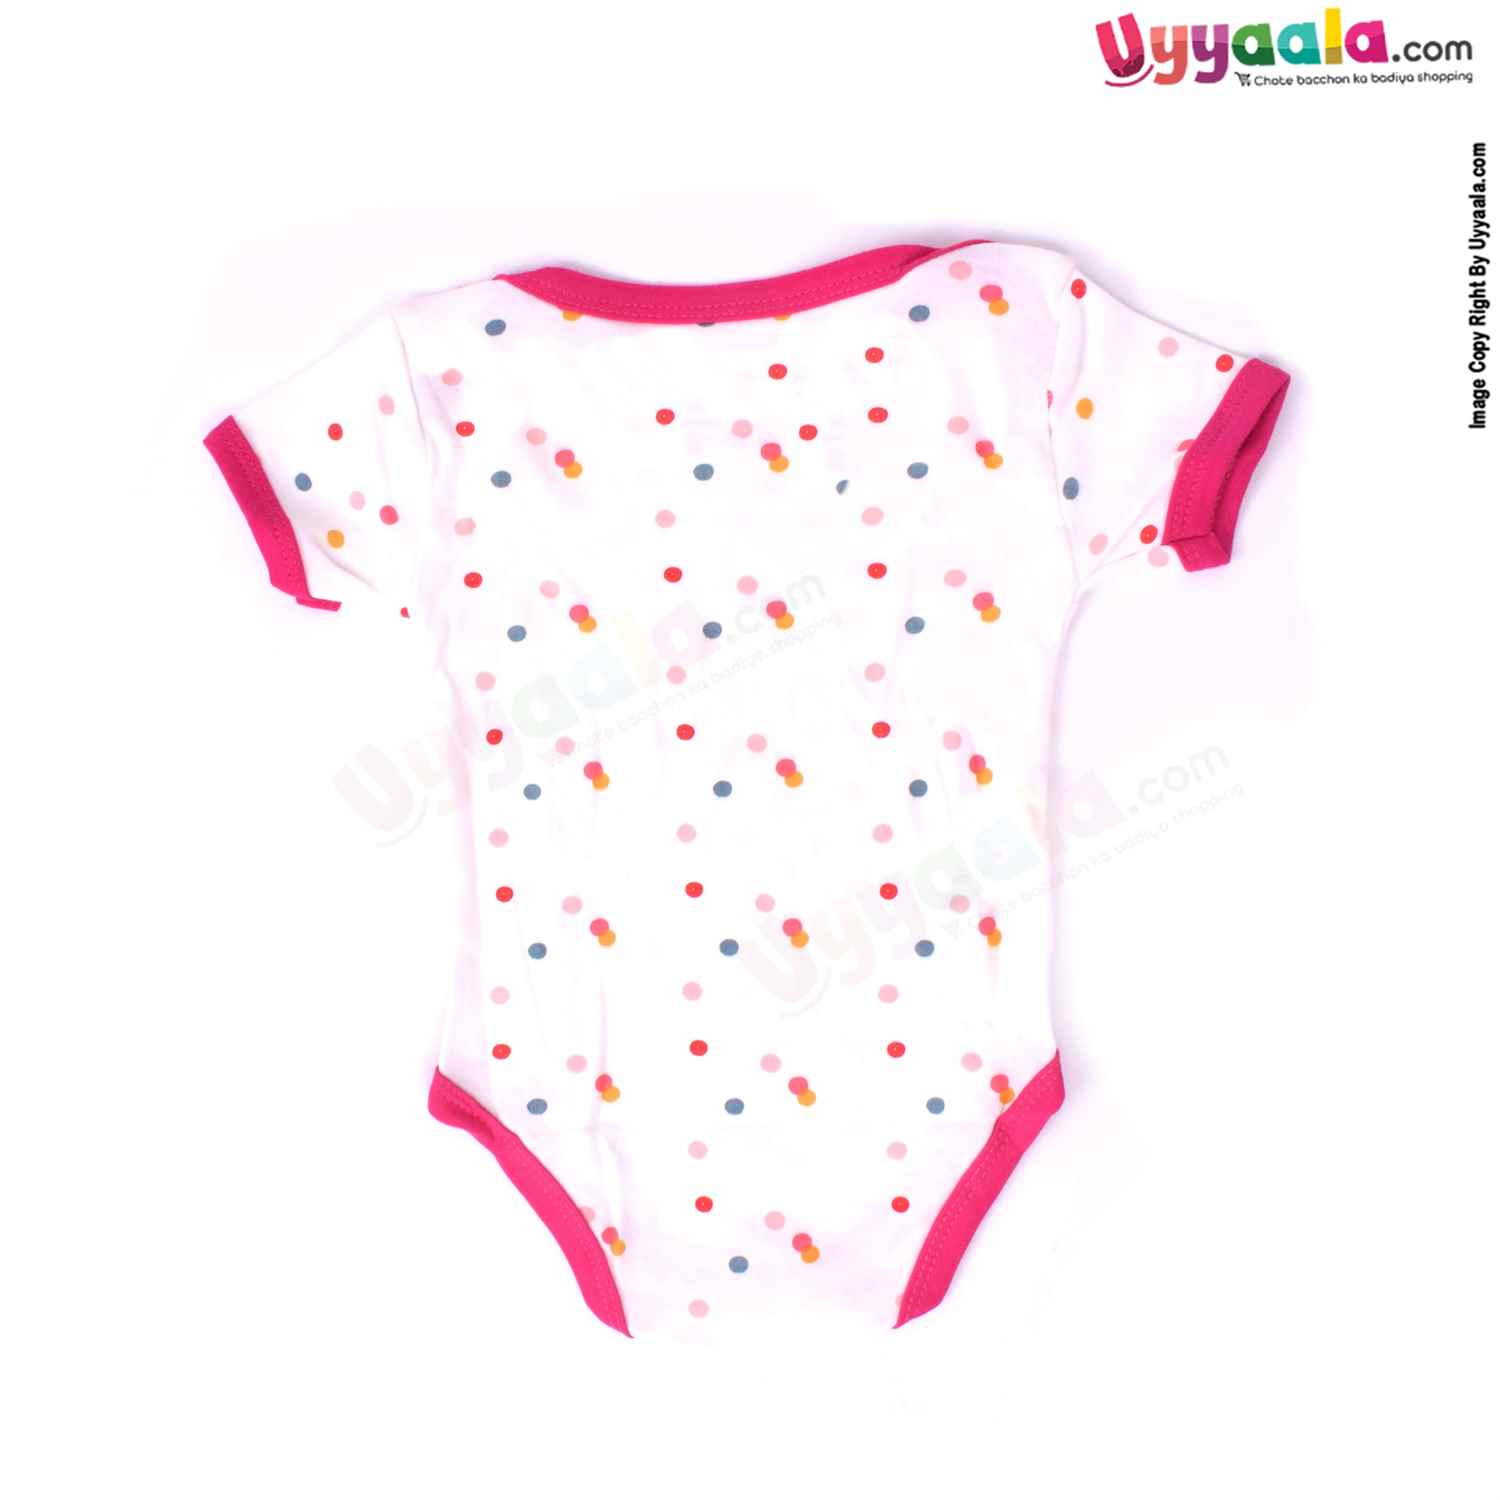 Precious One Short Sleeve Body Suit 100% Soft Hosiery Cotton - White with Dotted Print (6-9M)